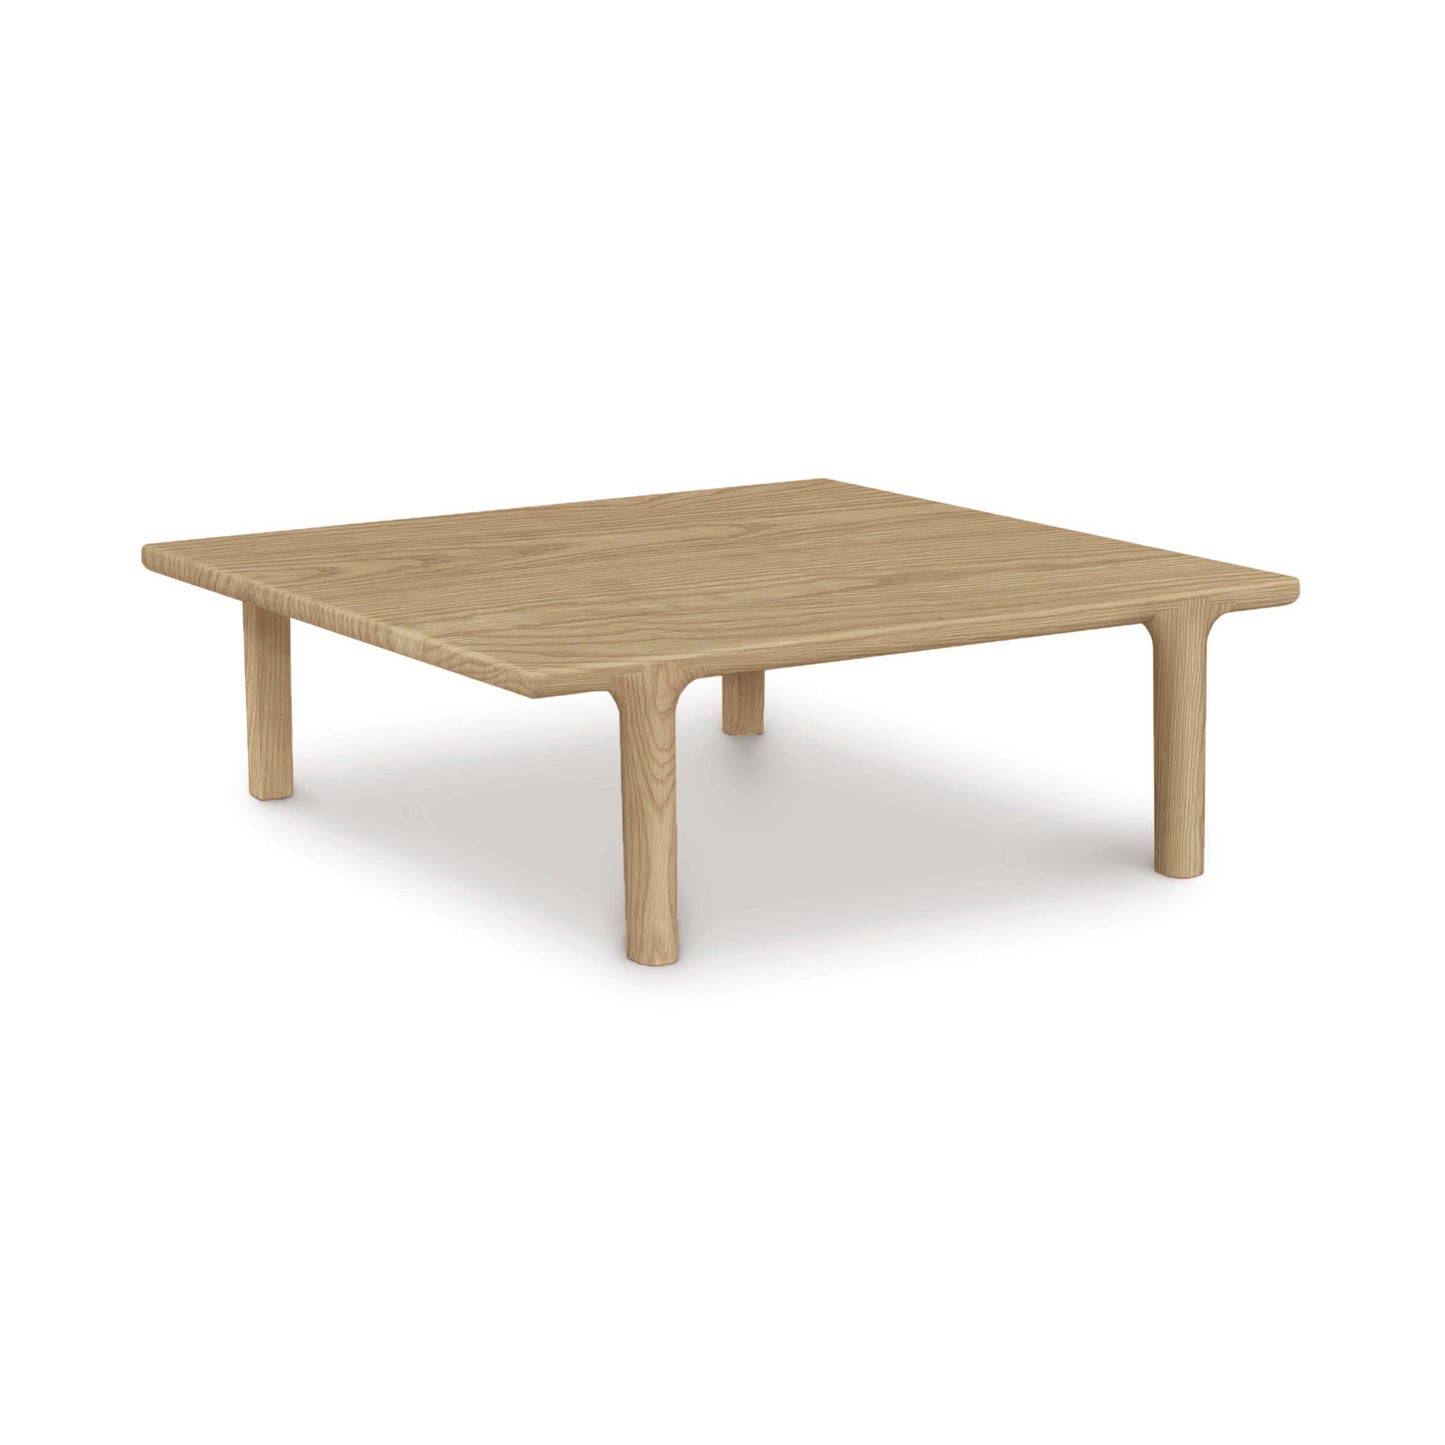 Copeland Furniture's Sierra Square Coffee Table: Contemporary design low wooden table crafted from North American hardwood on a white background.